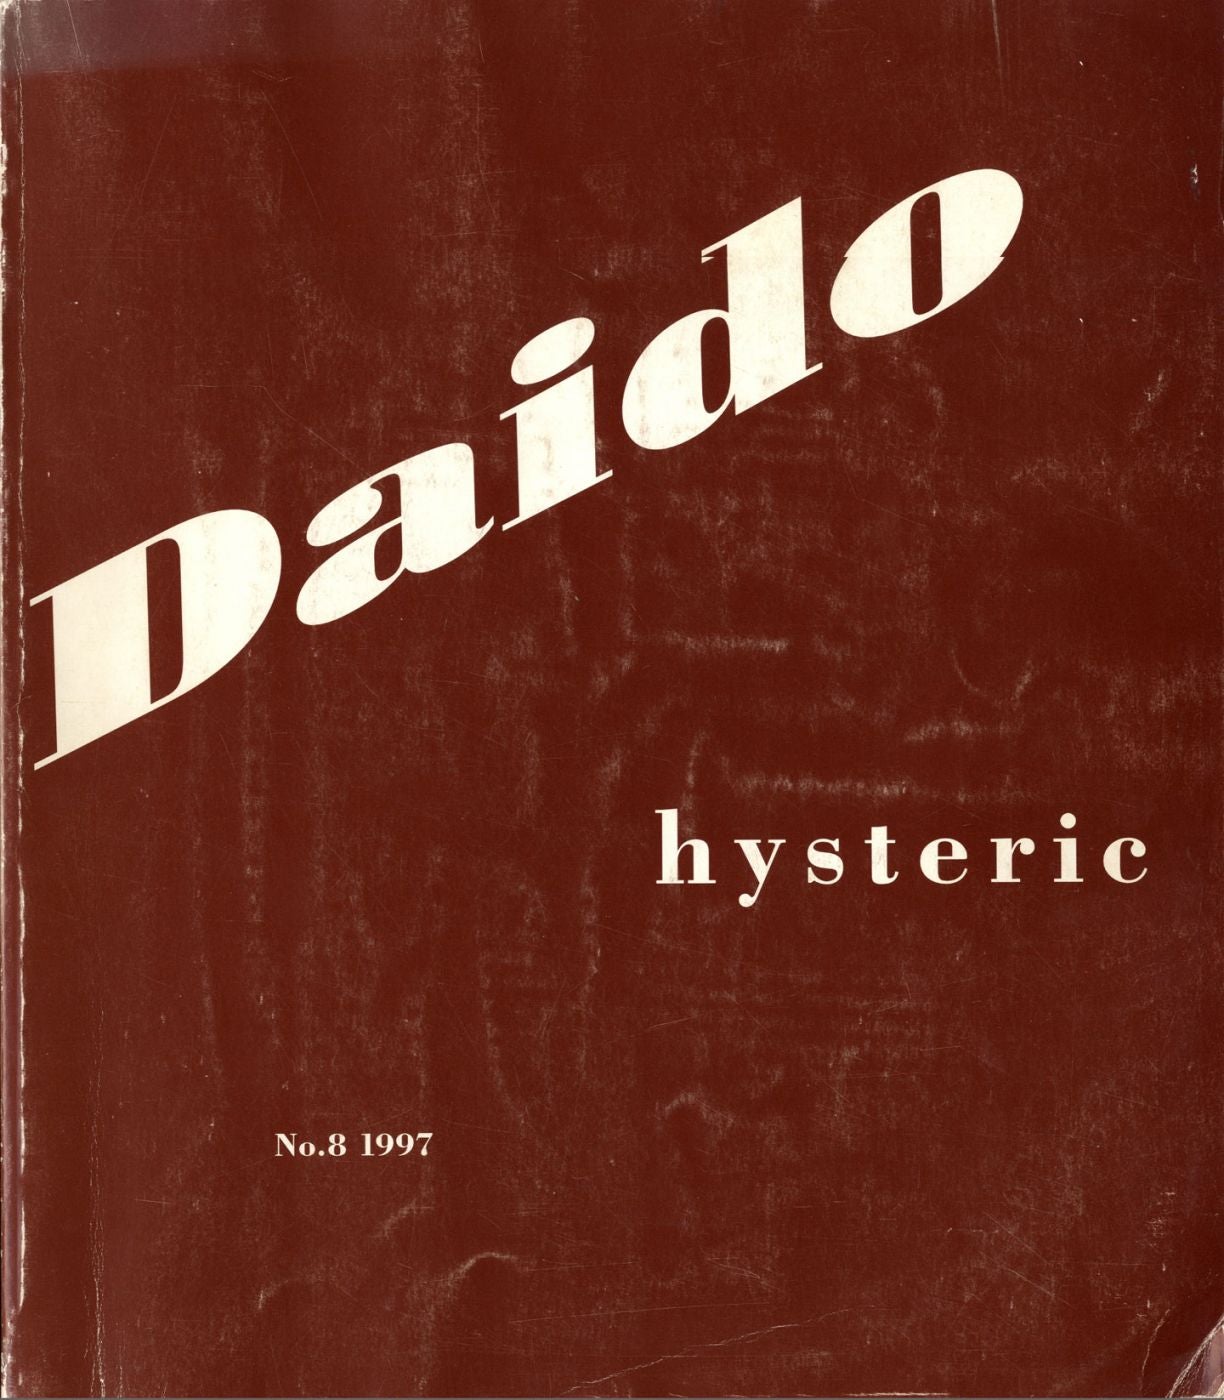 Hysteric Glamour: Daido Moriyama (Hysteric No. 8, 1997), Limited Edition [SIGNED]